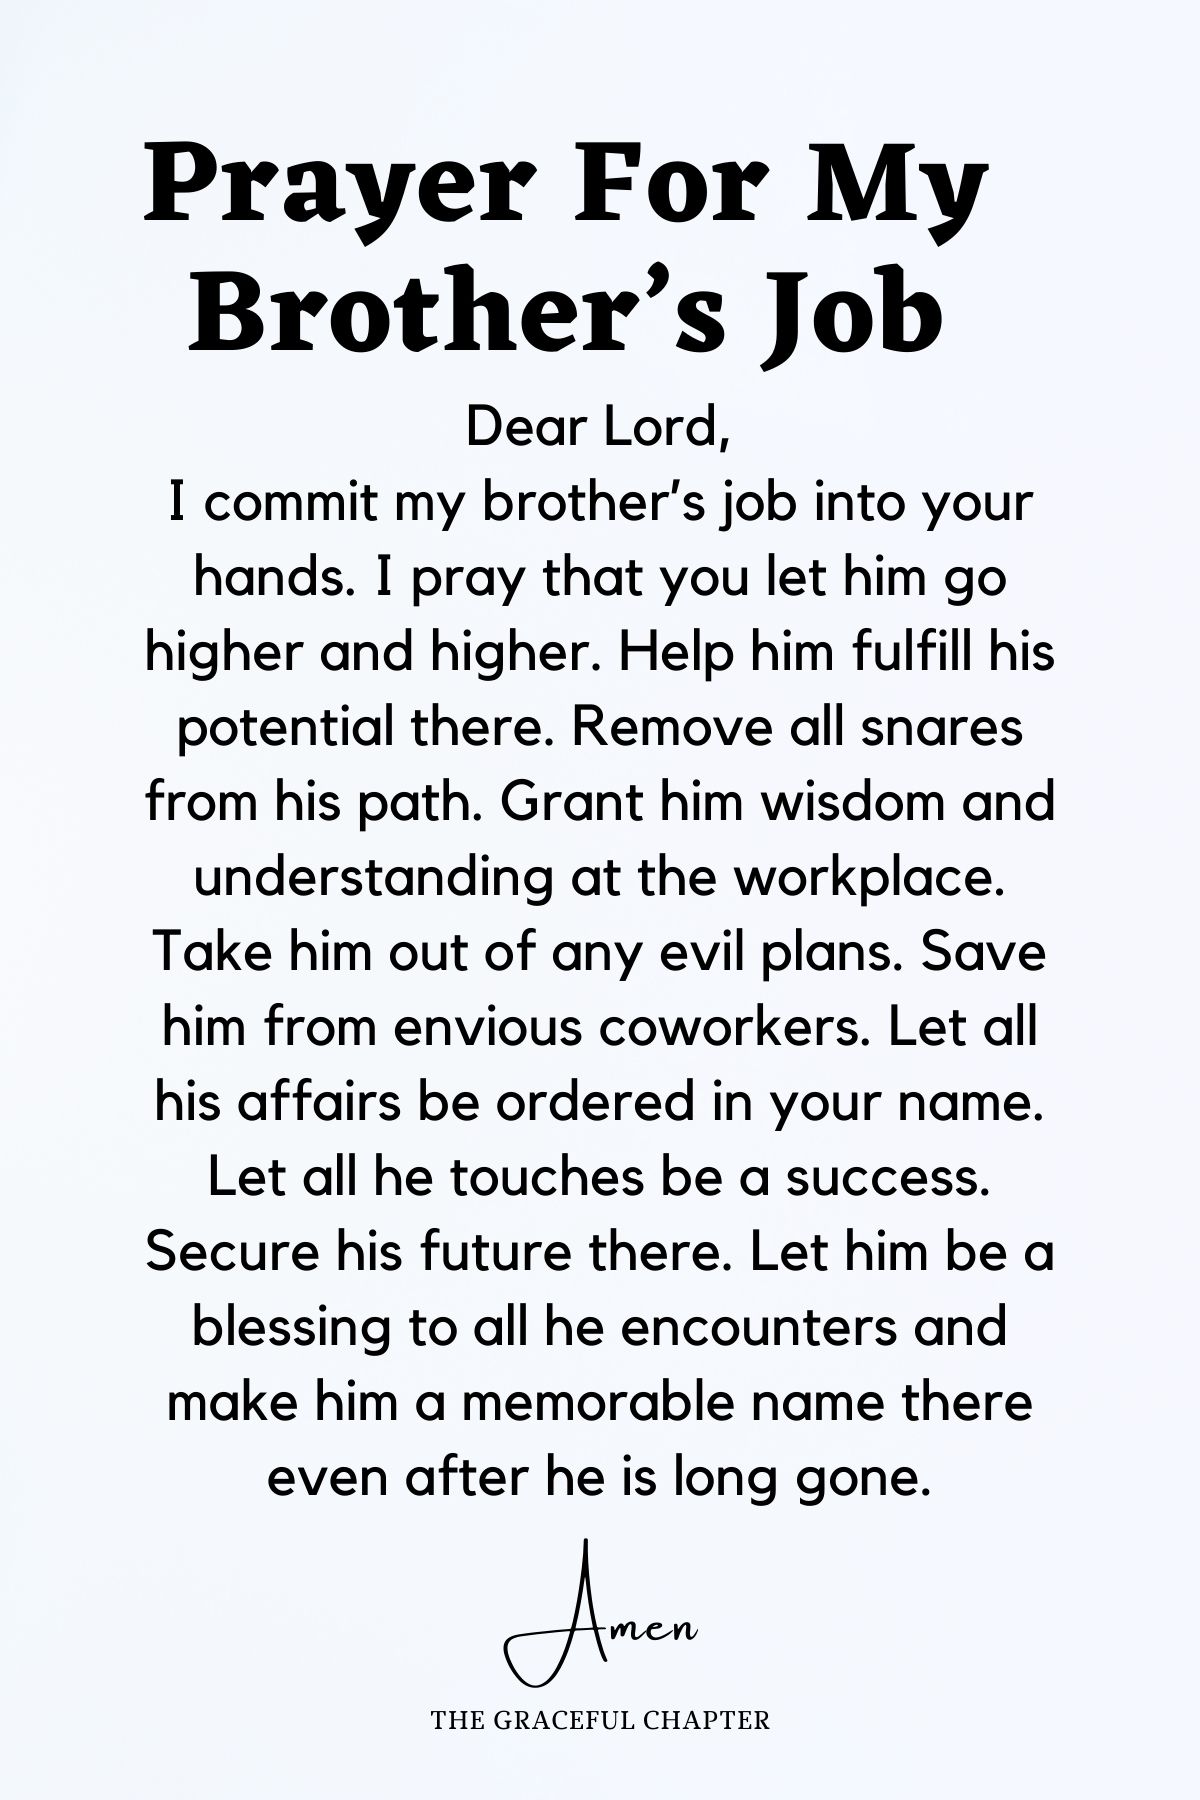 Prayer for my brother’s job -Prayers for my brother